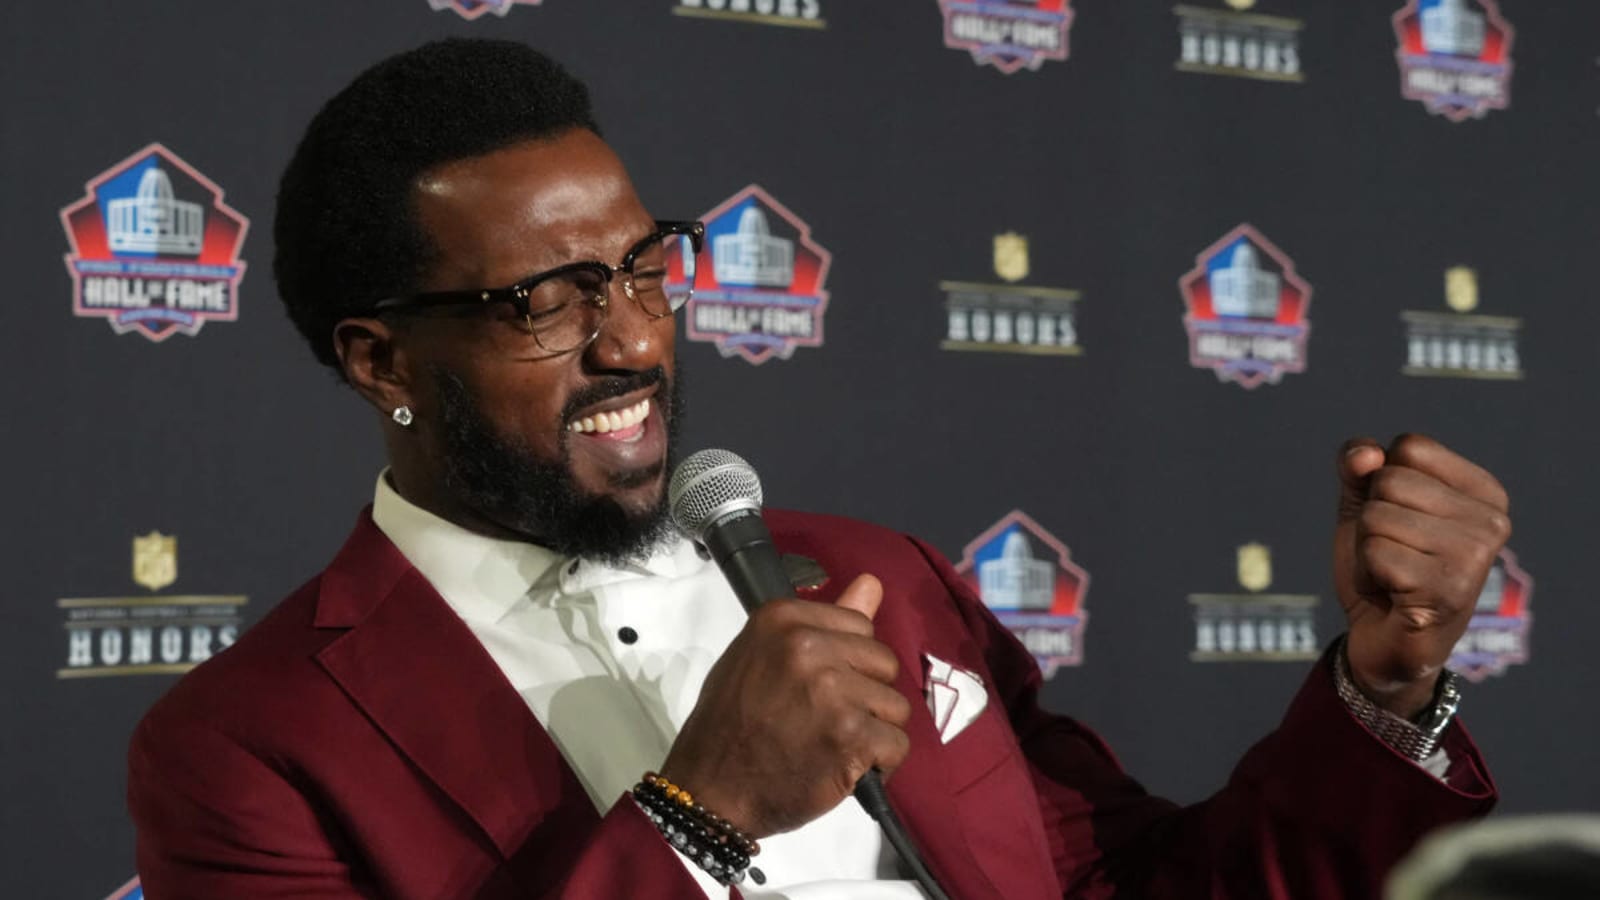 Watch: Former Rebels LB Patrick Willis Finds Out Hall Of Fame News